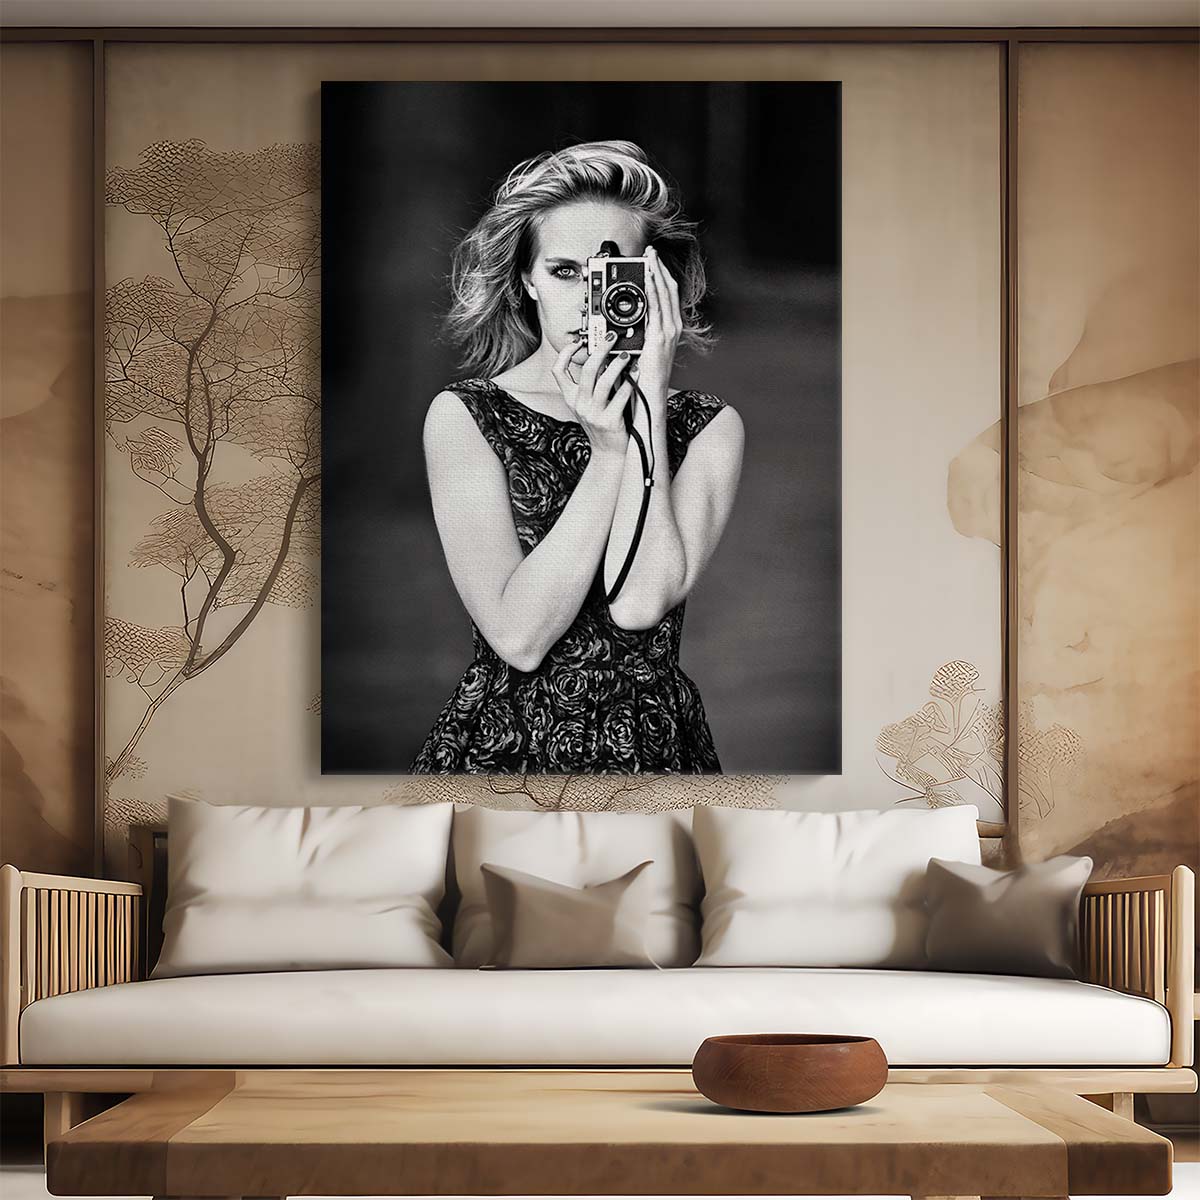 Monochrome Mood Portrait Woman with Camera in Floral Dress by Luxuriance Designs, made in USA